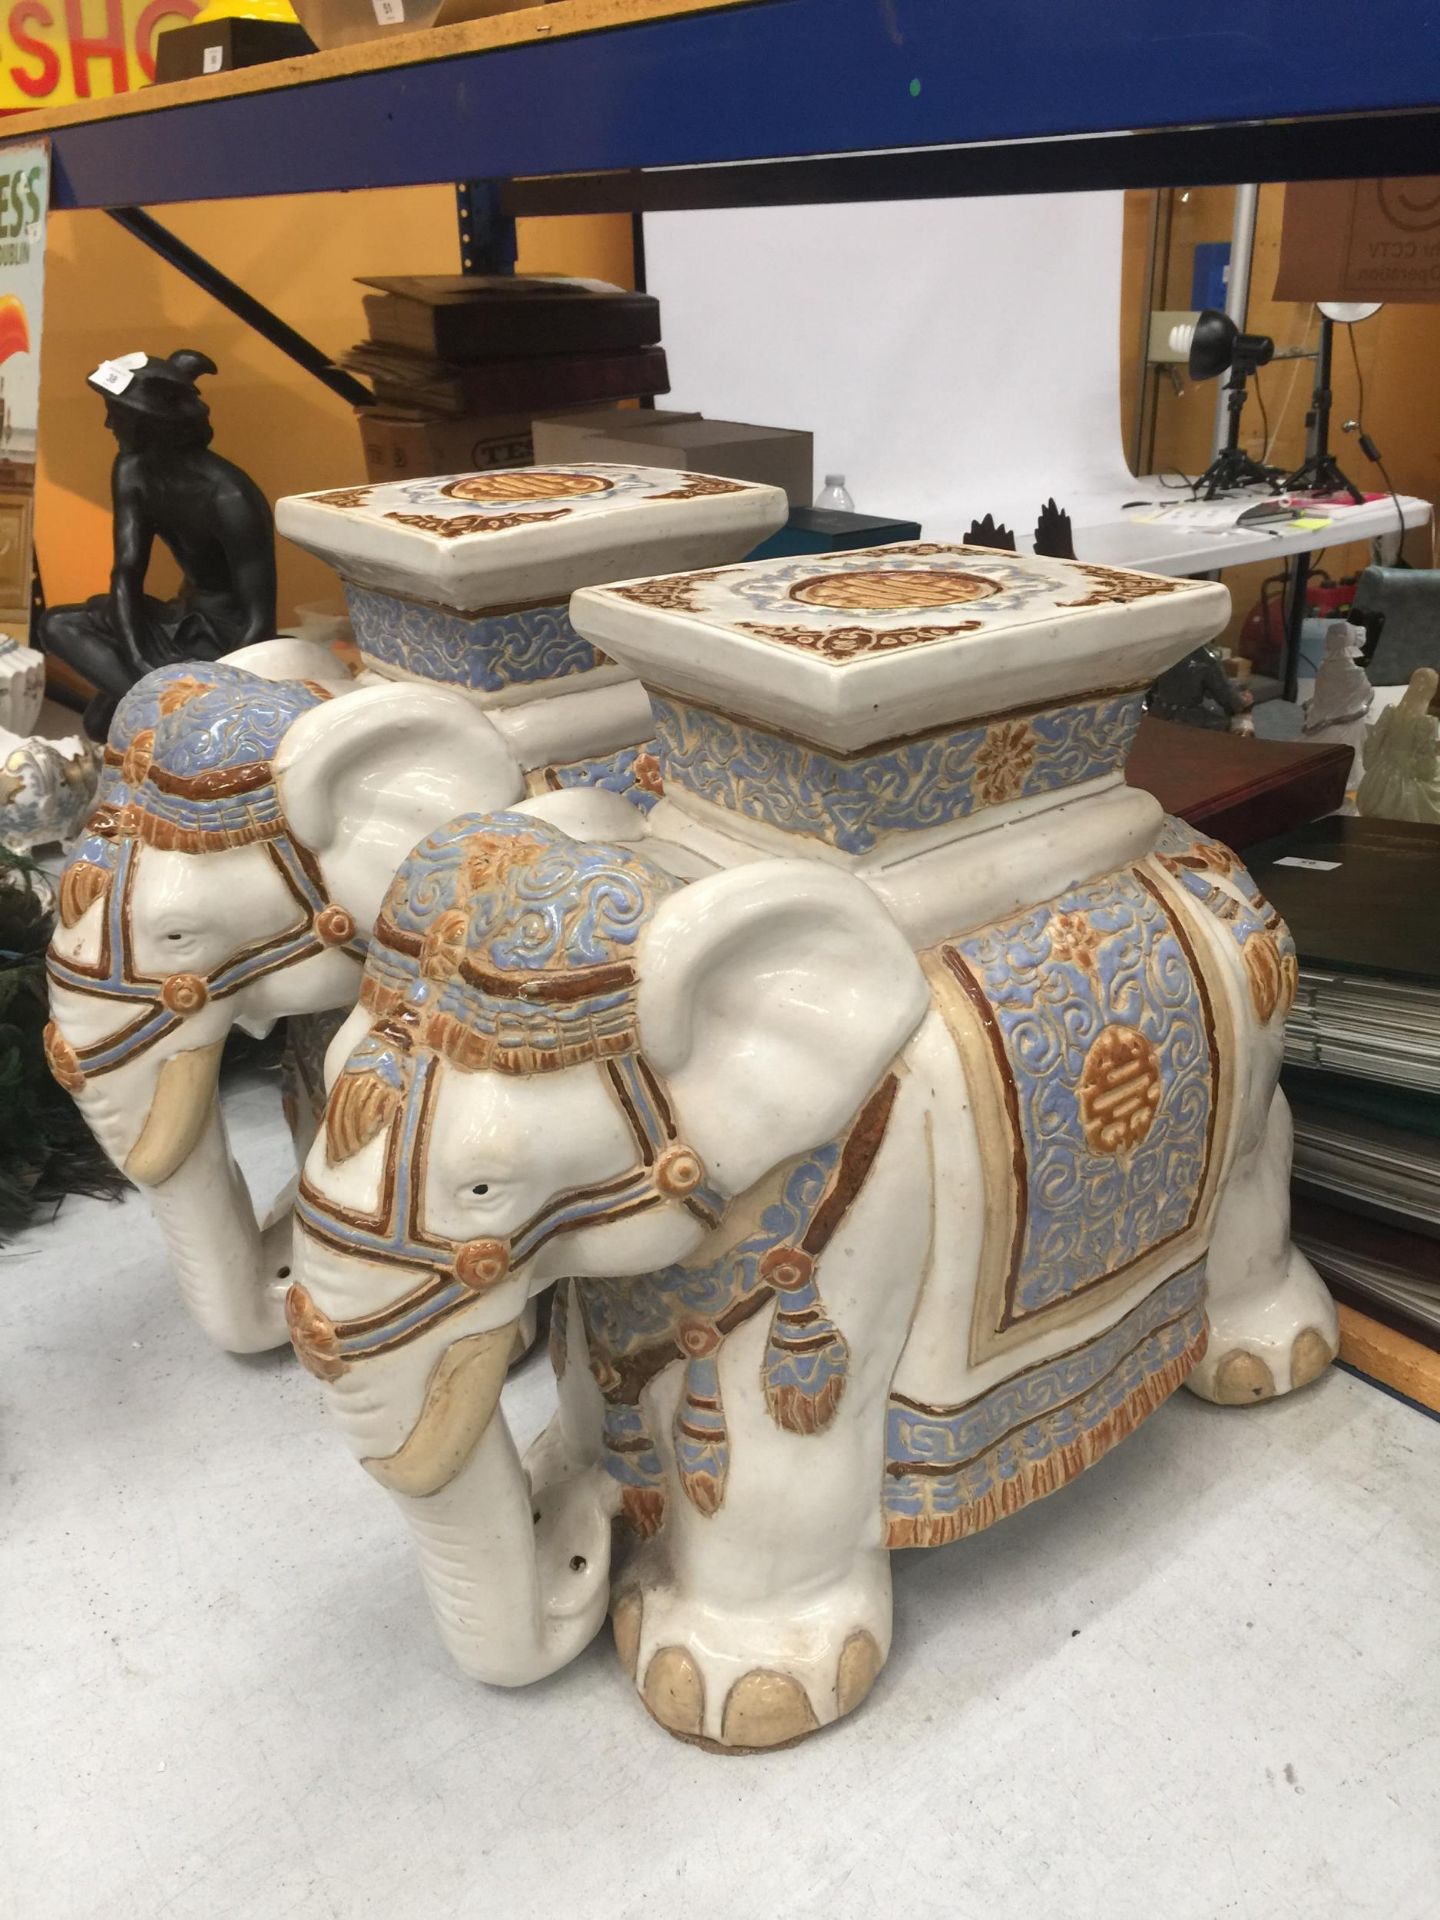 A PAIR OF LARGE CERAMIC ELEPHANT GARDEN SEATS - Image 2 of 4